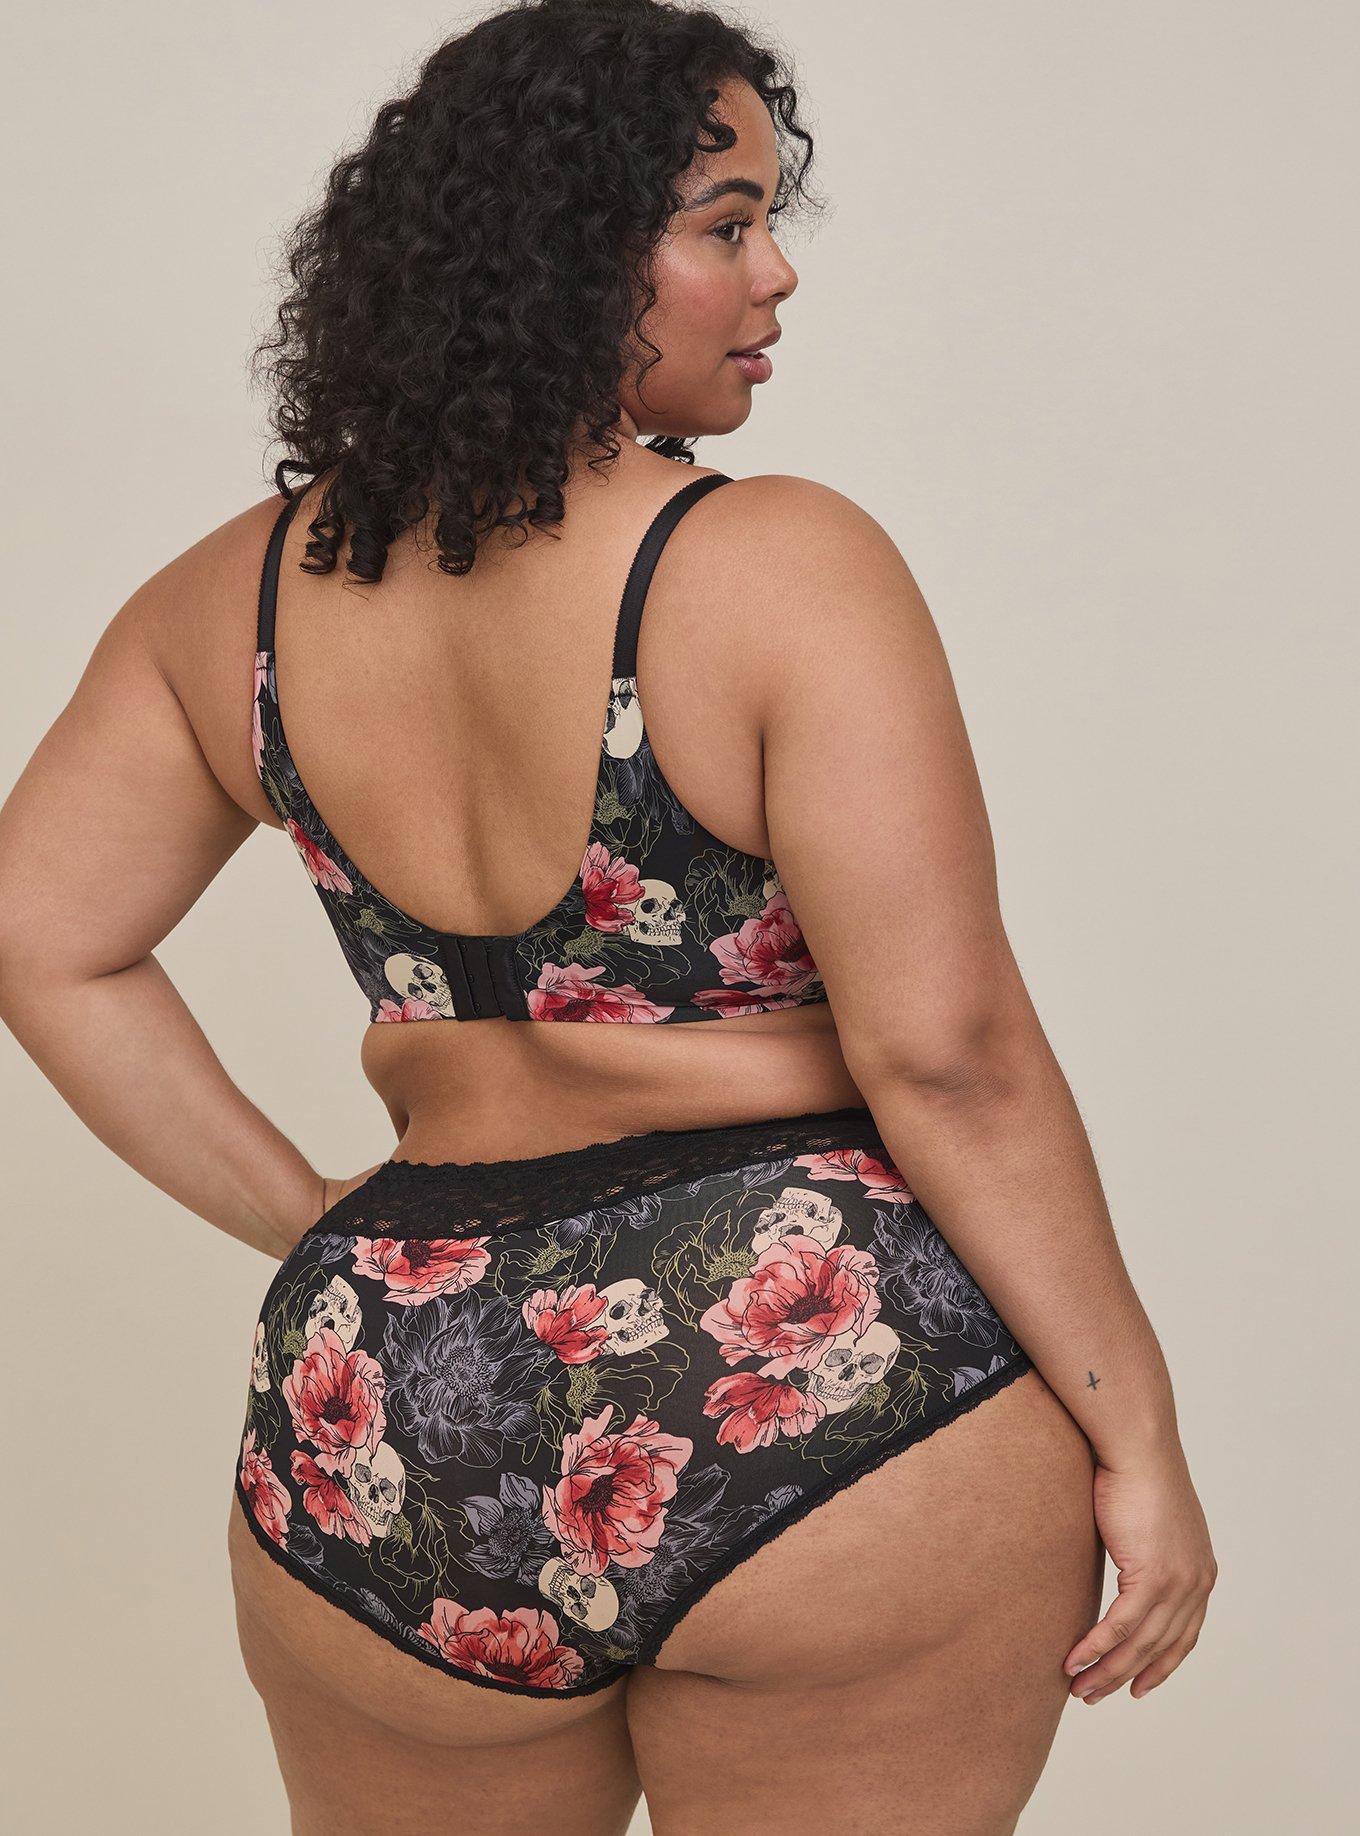 Plus Size - Cage Back Brief Panty - Lace & Microfiber Heather Grey